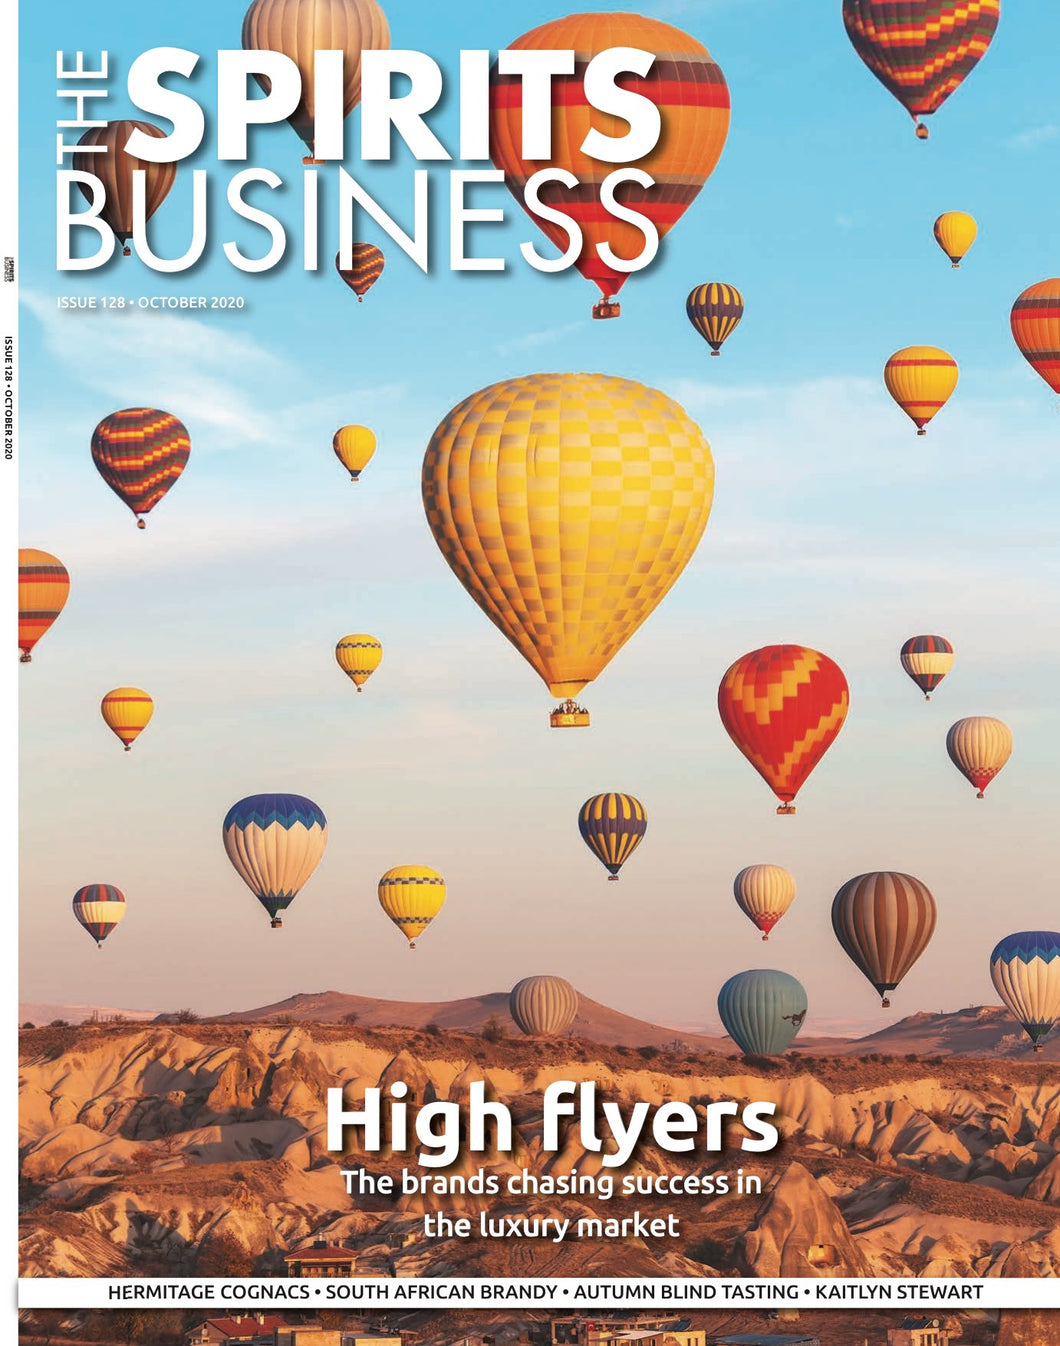 The Spirits Business - October 2020